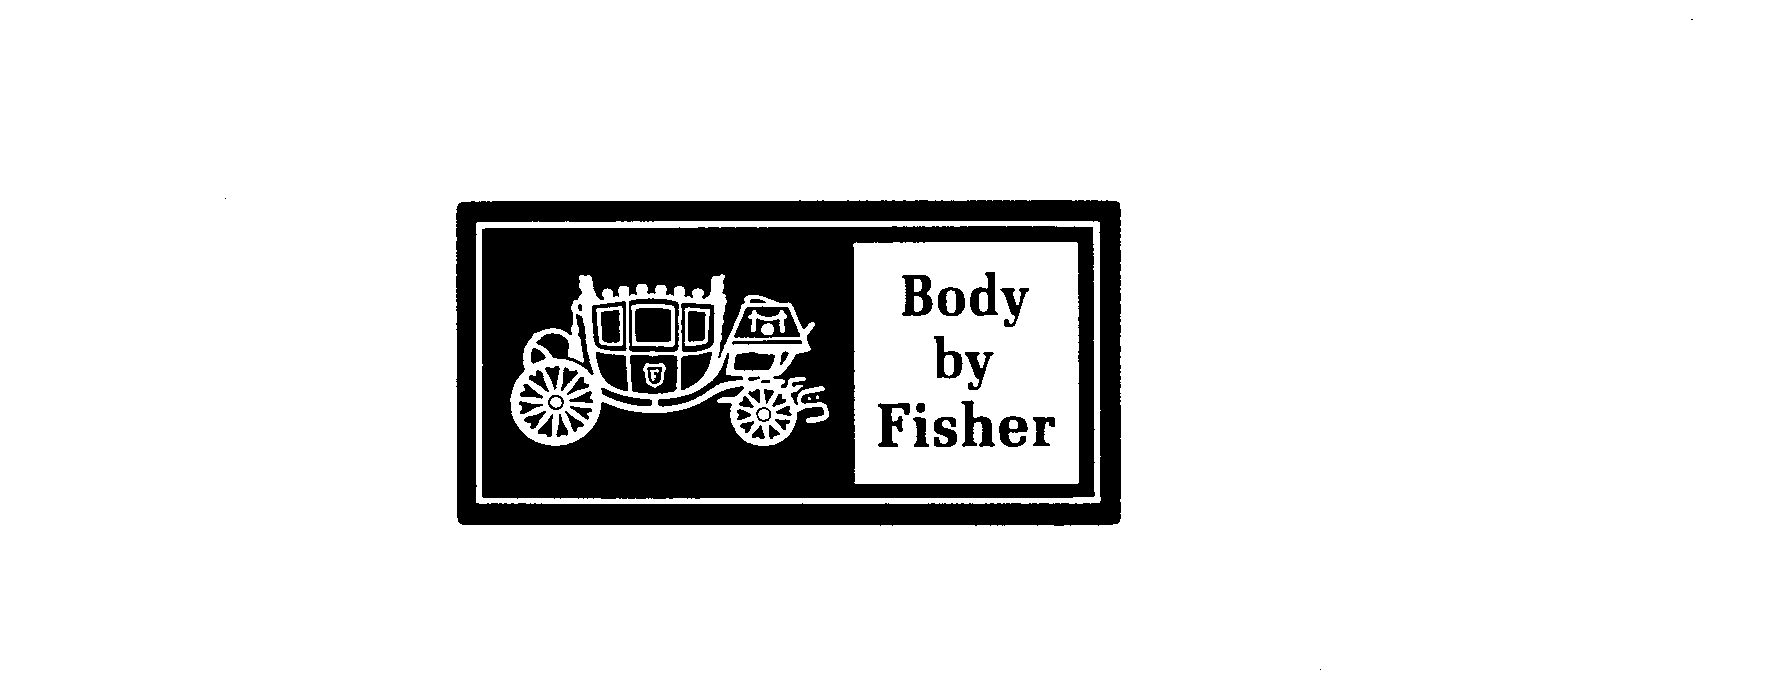  BODY BY FISHER